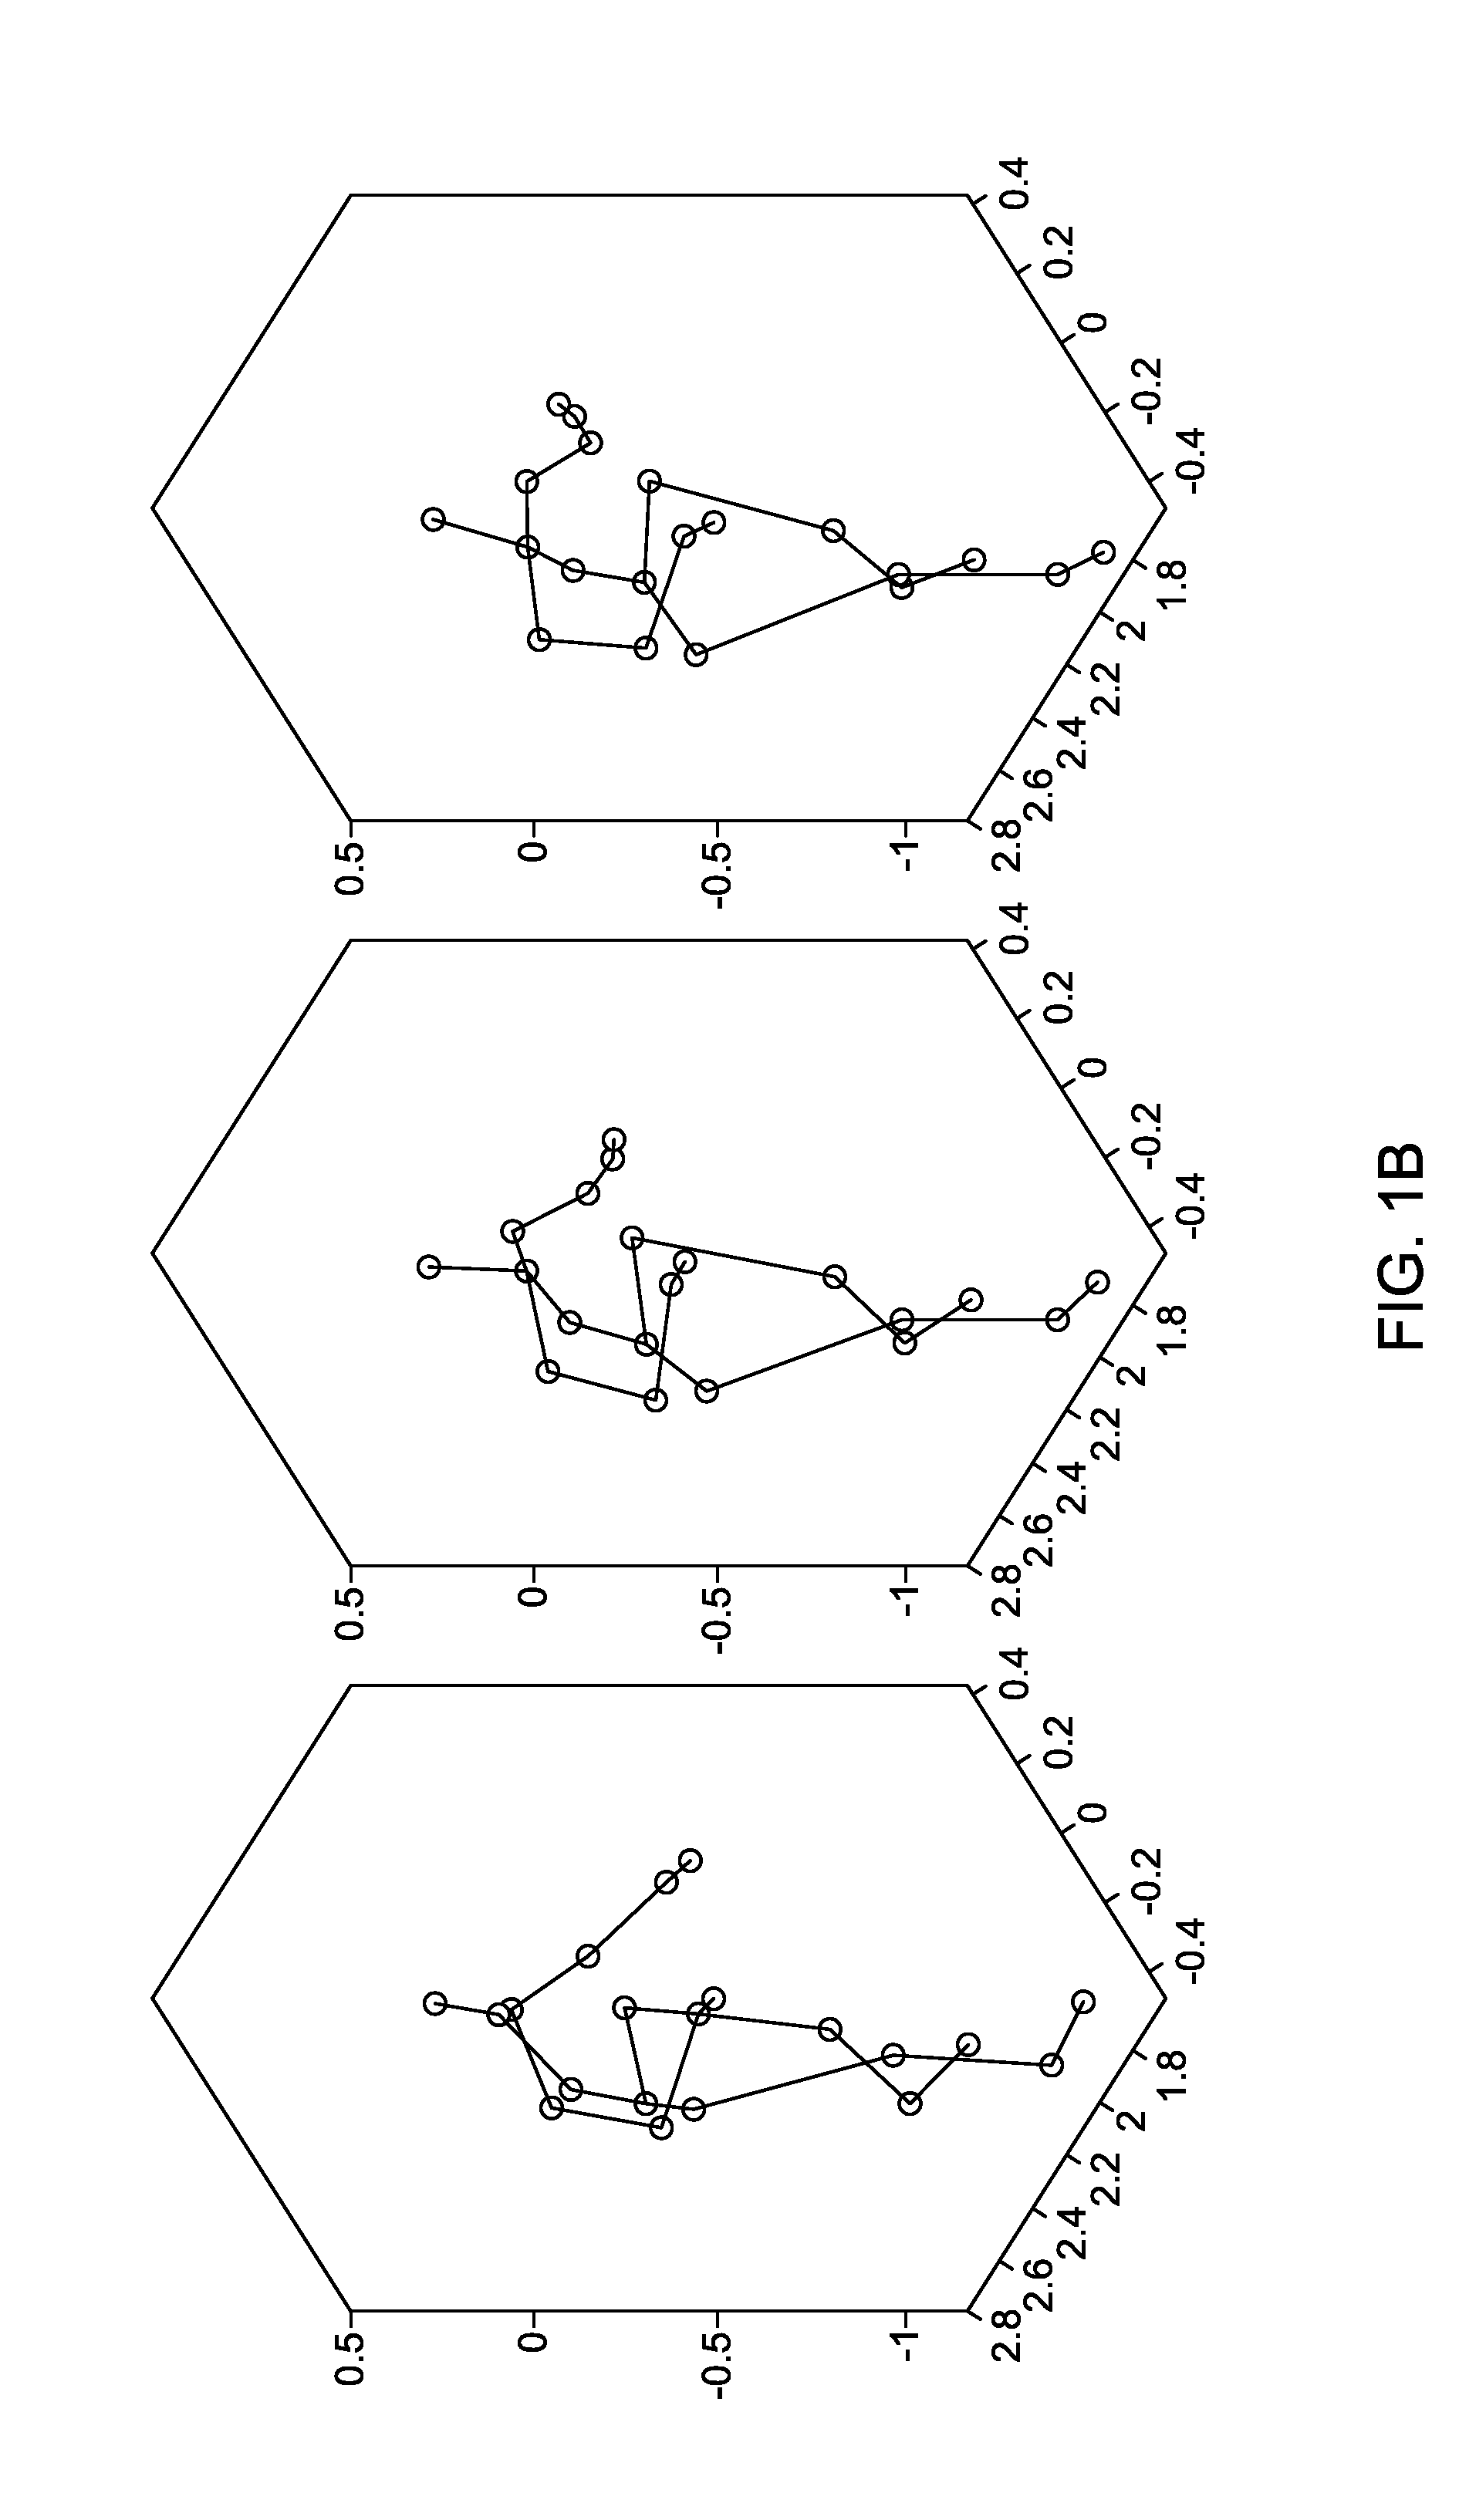 System and method for determining view invariant spatial-temporal descriptors for motion detection and analysis